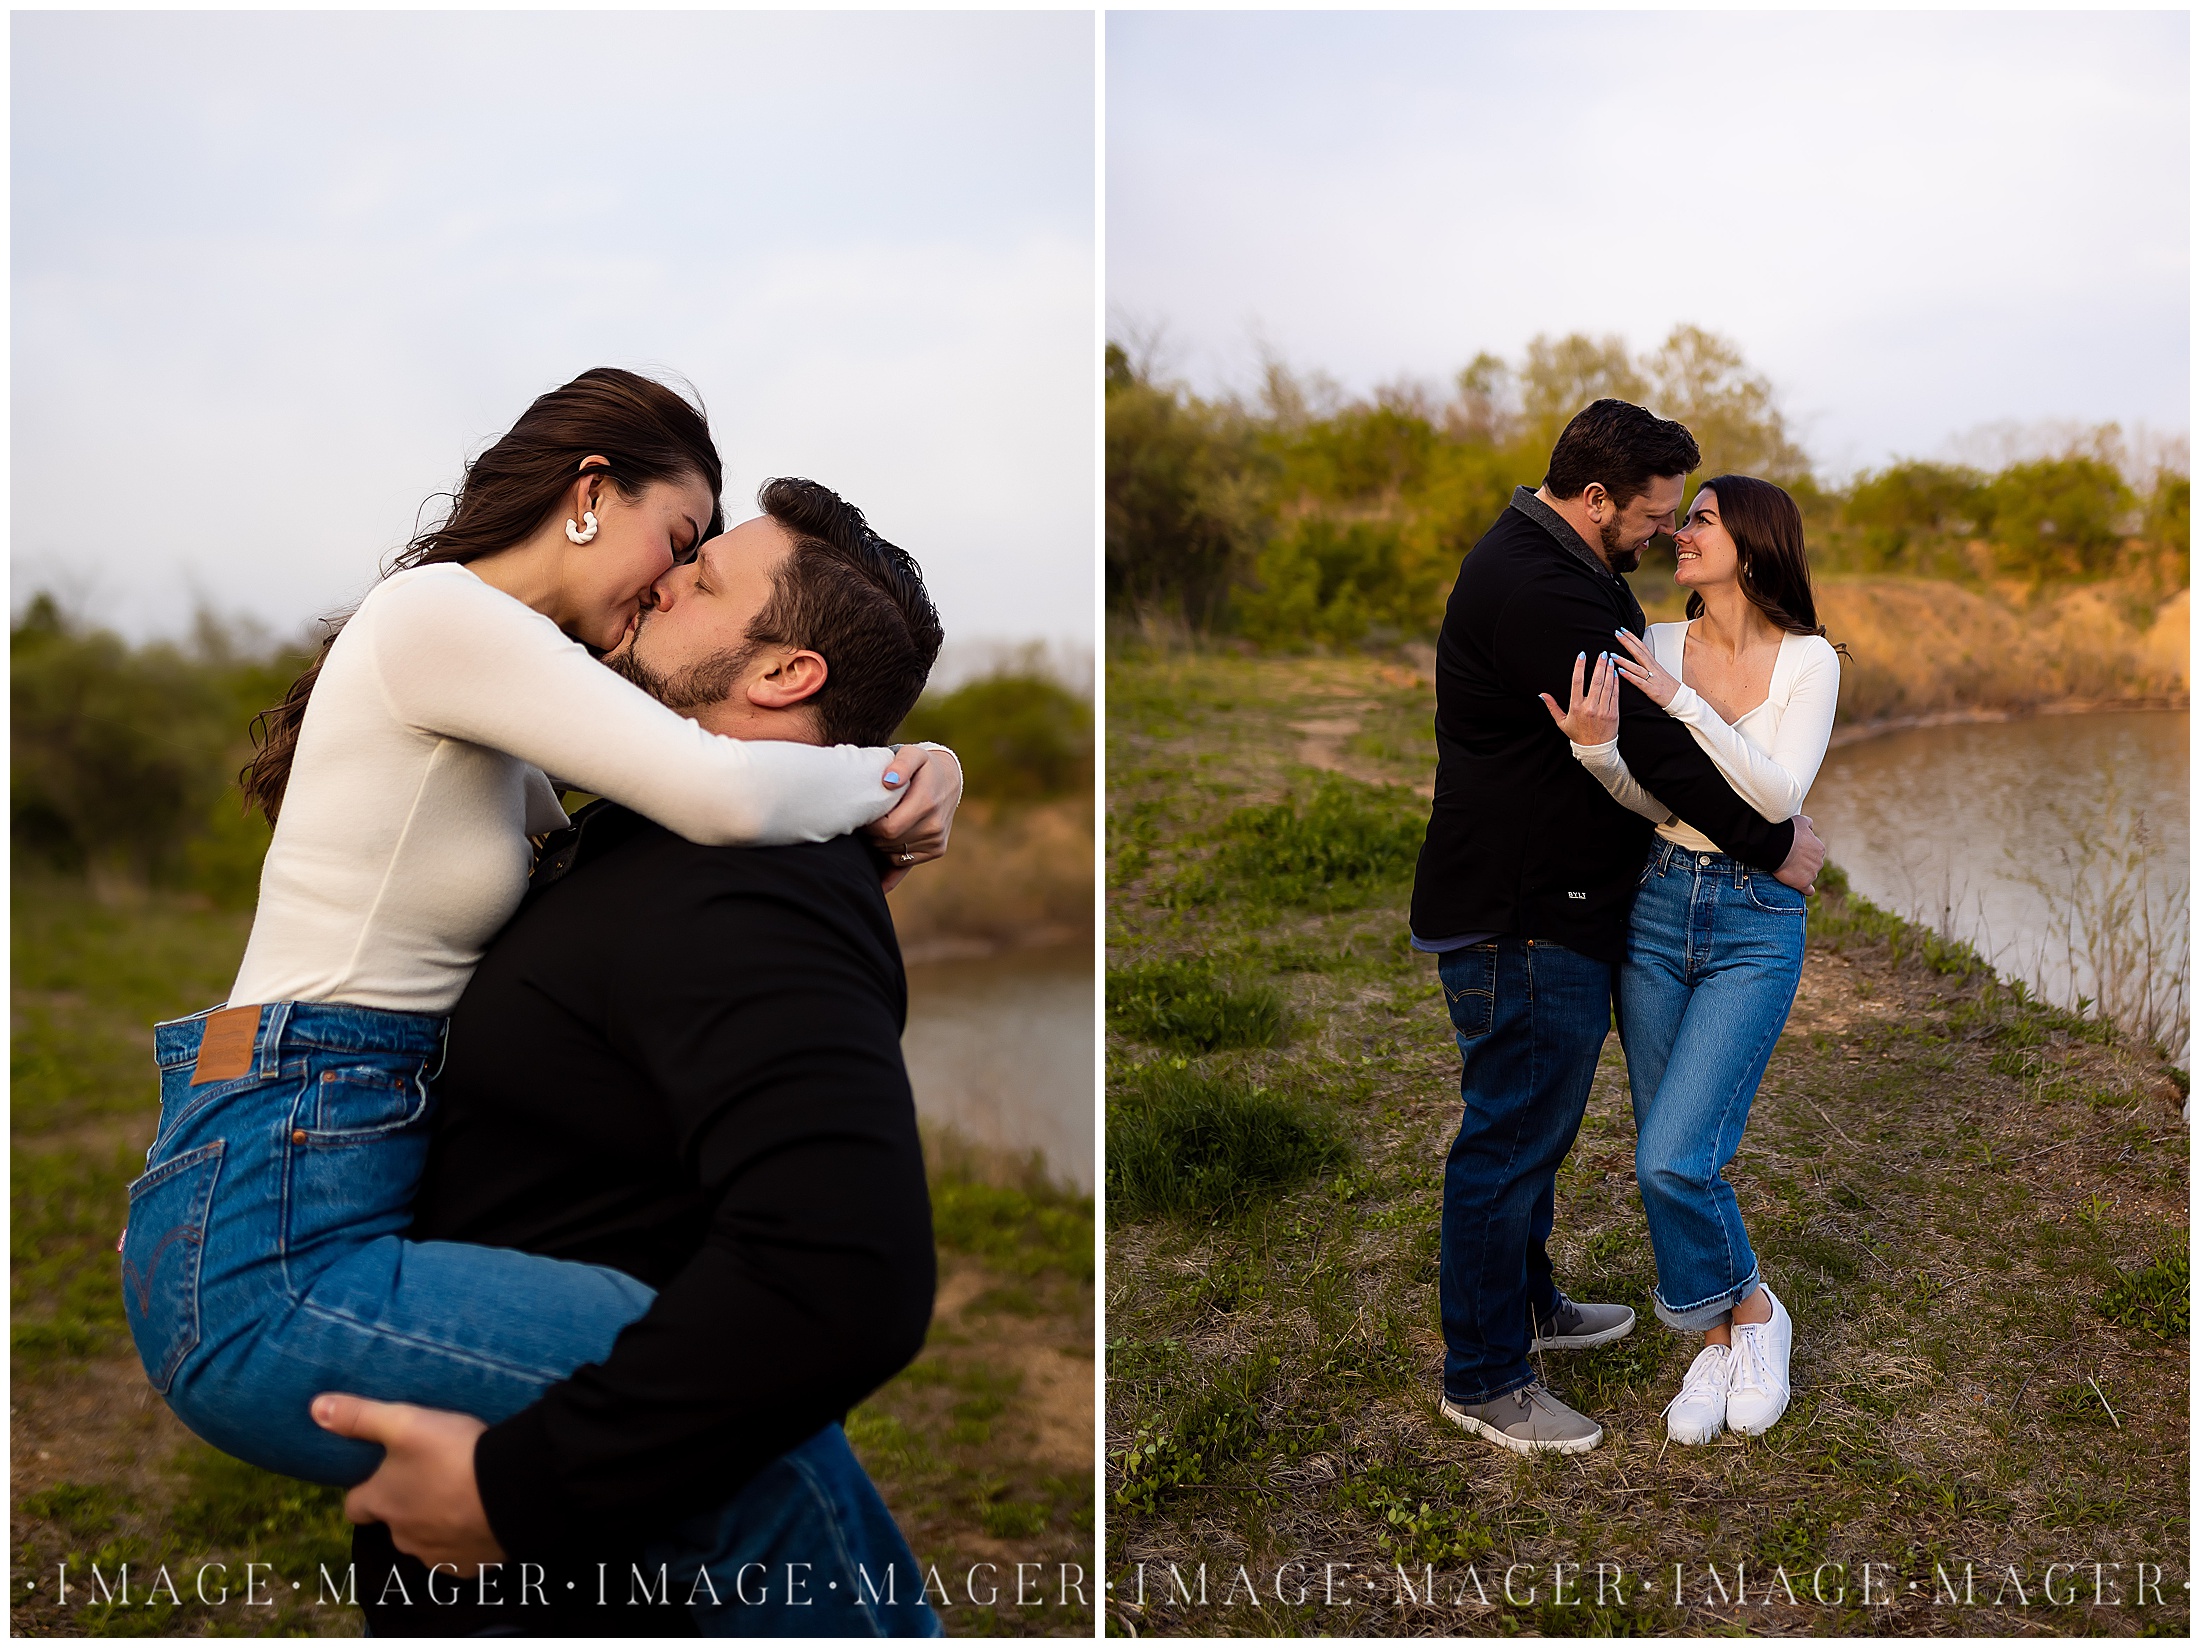 Easygoing Engagement Session at Riverbend Forest Preserve, Mahomet, Illinois